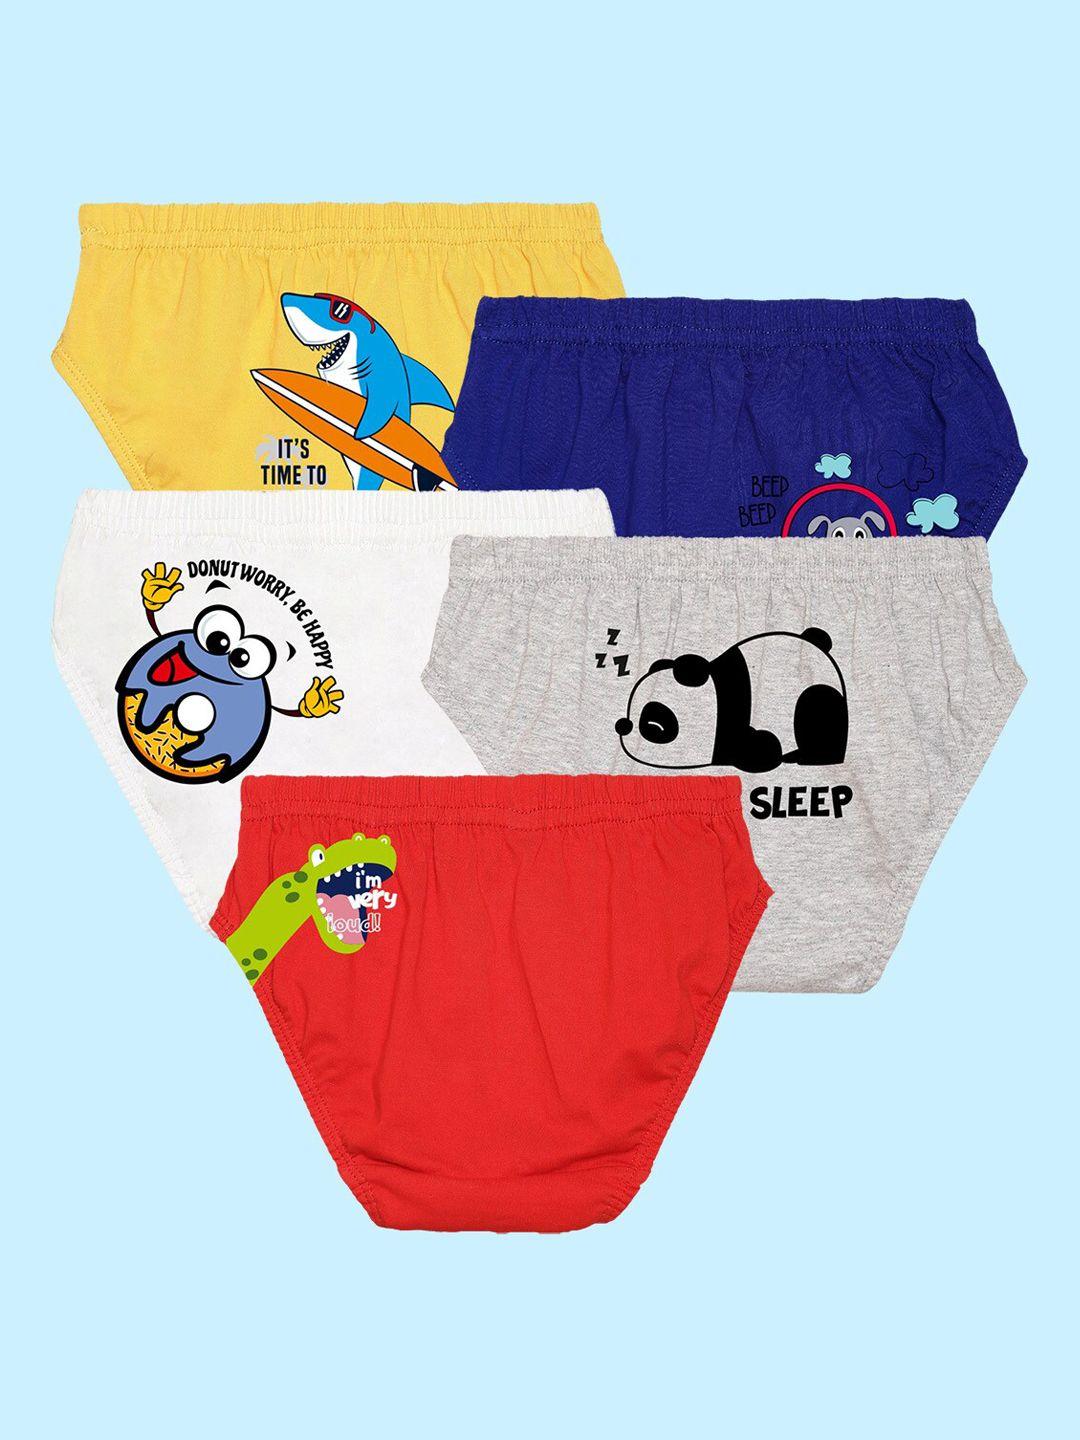 nusyl boys pack of 5 printed cotton anti-bacterial basic brief